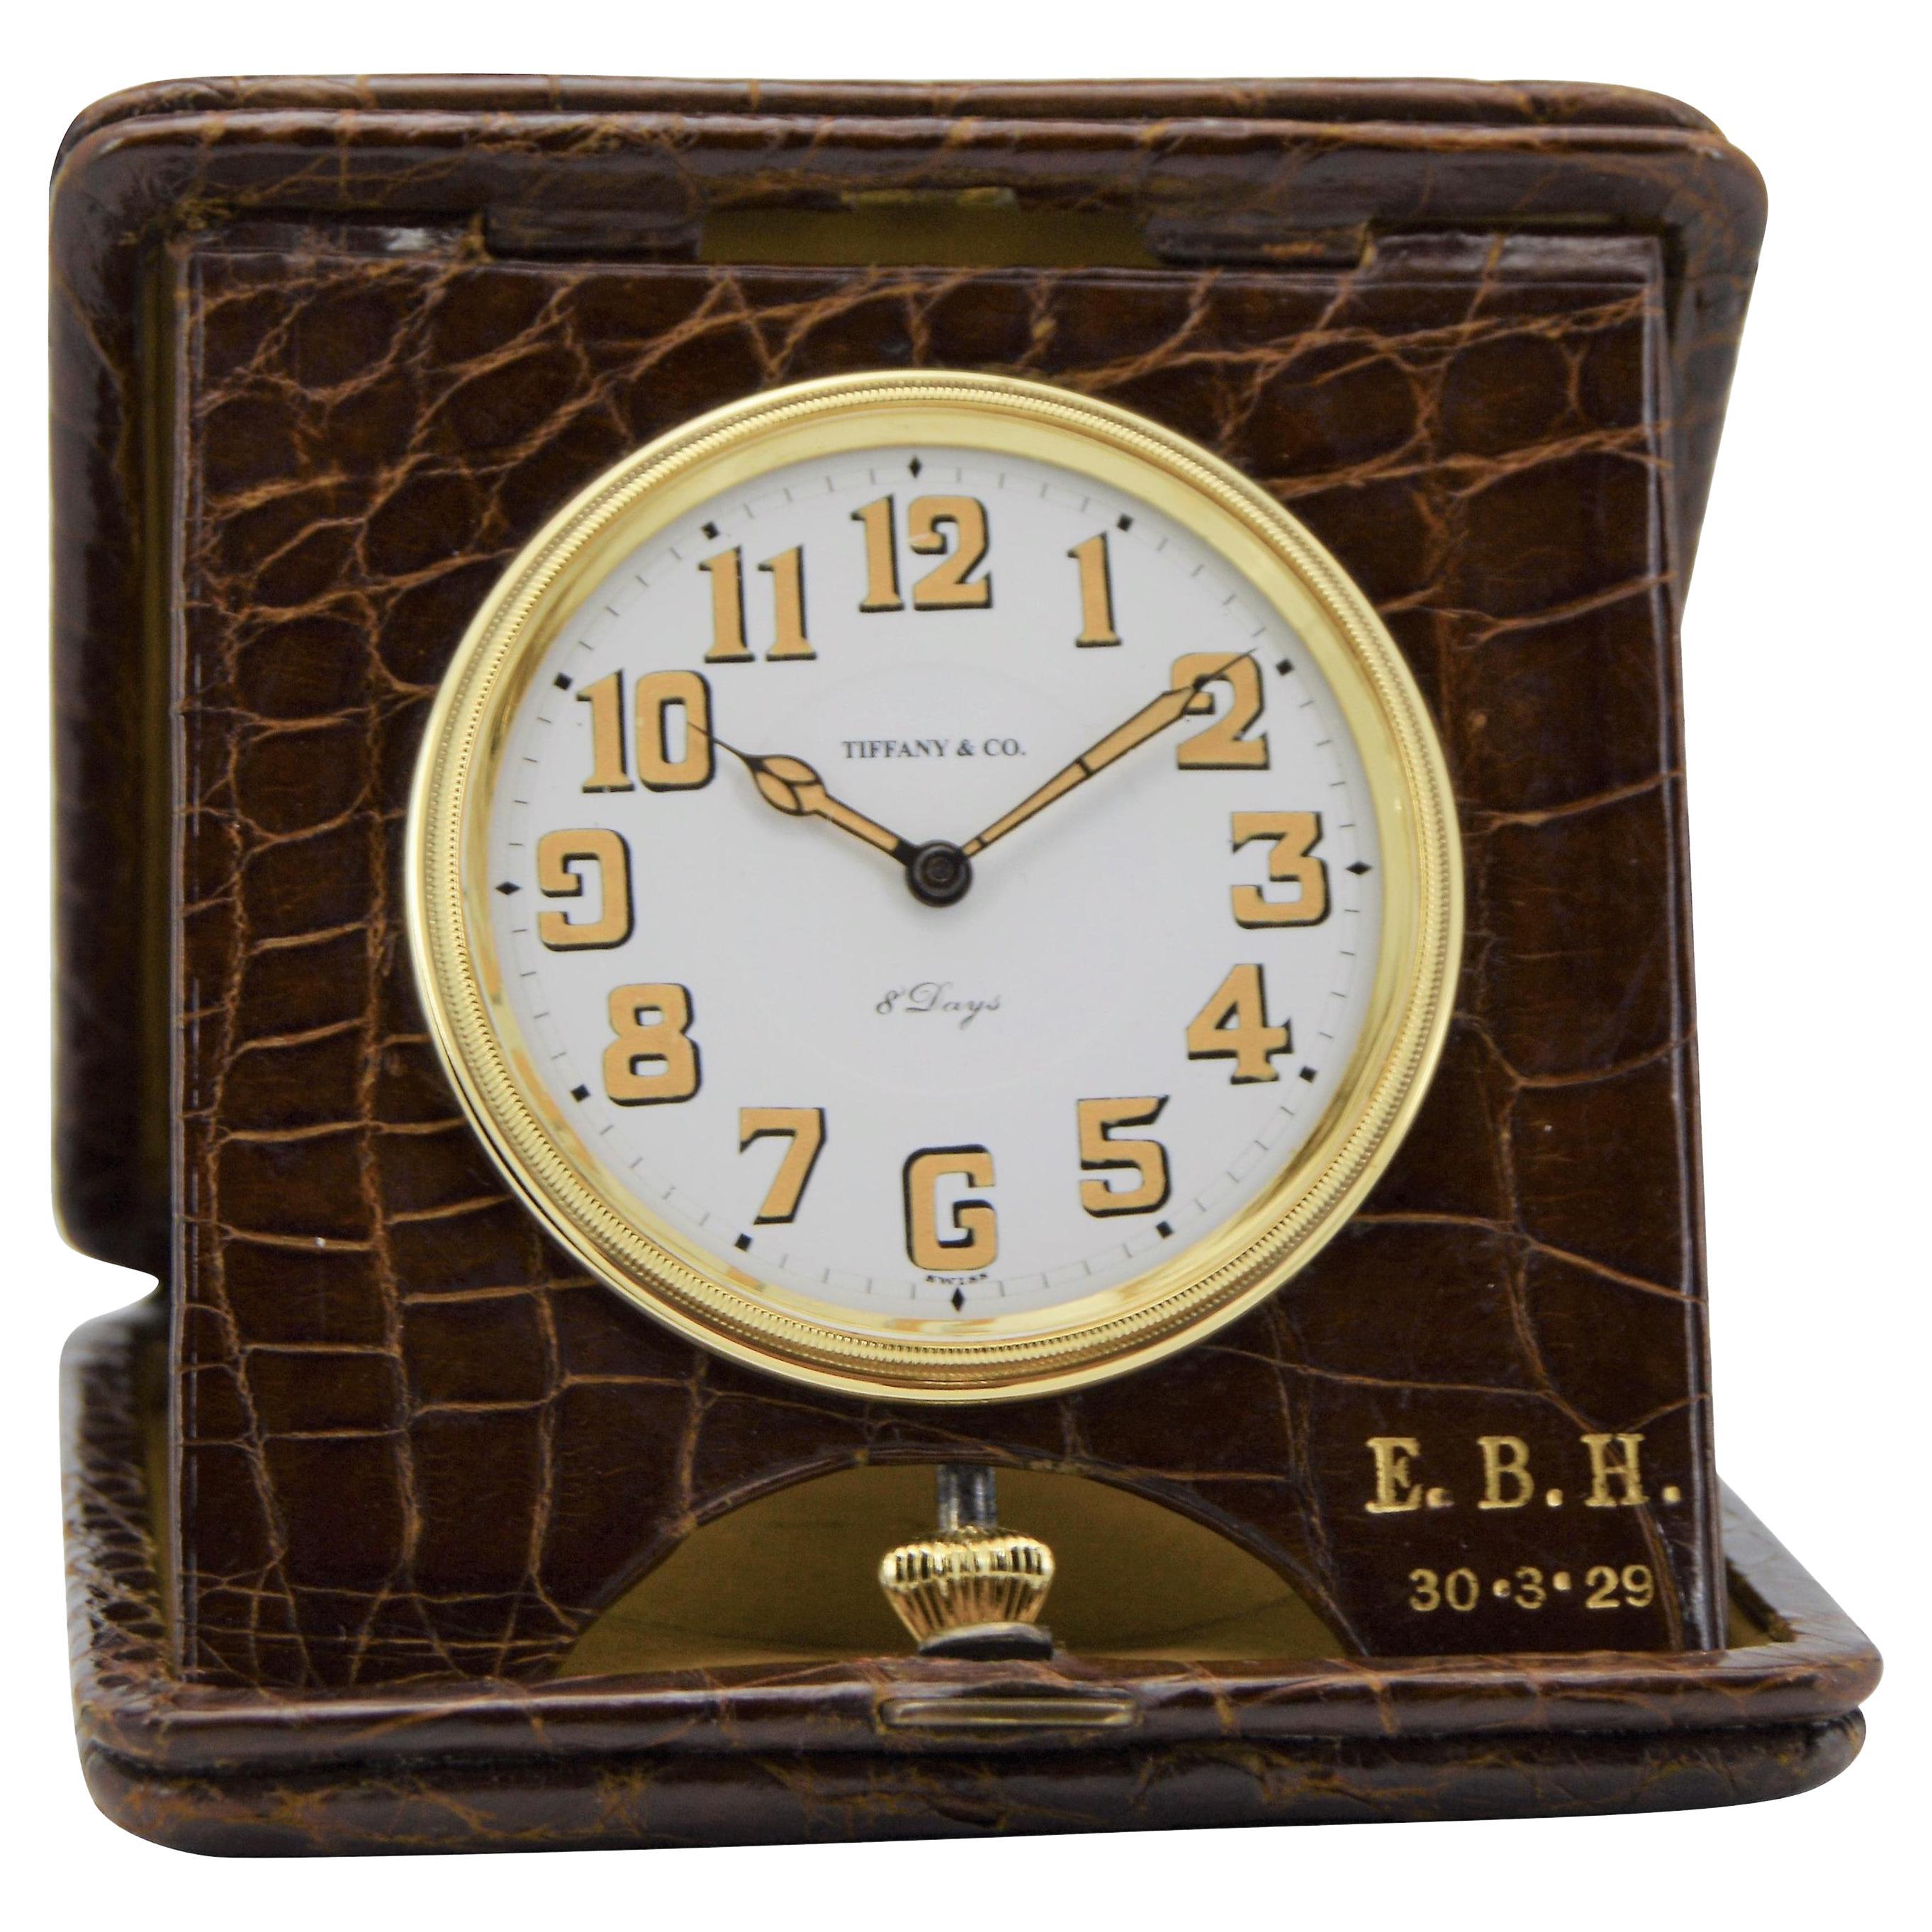 Tiffany & Co. Elegant Reptilian Folding Desk Clock with Fired Dial from 1929 For Sale